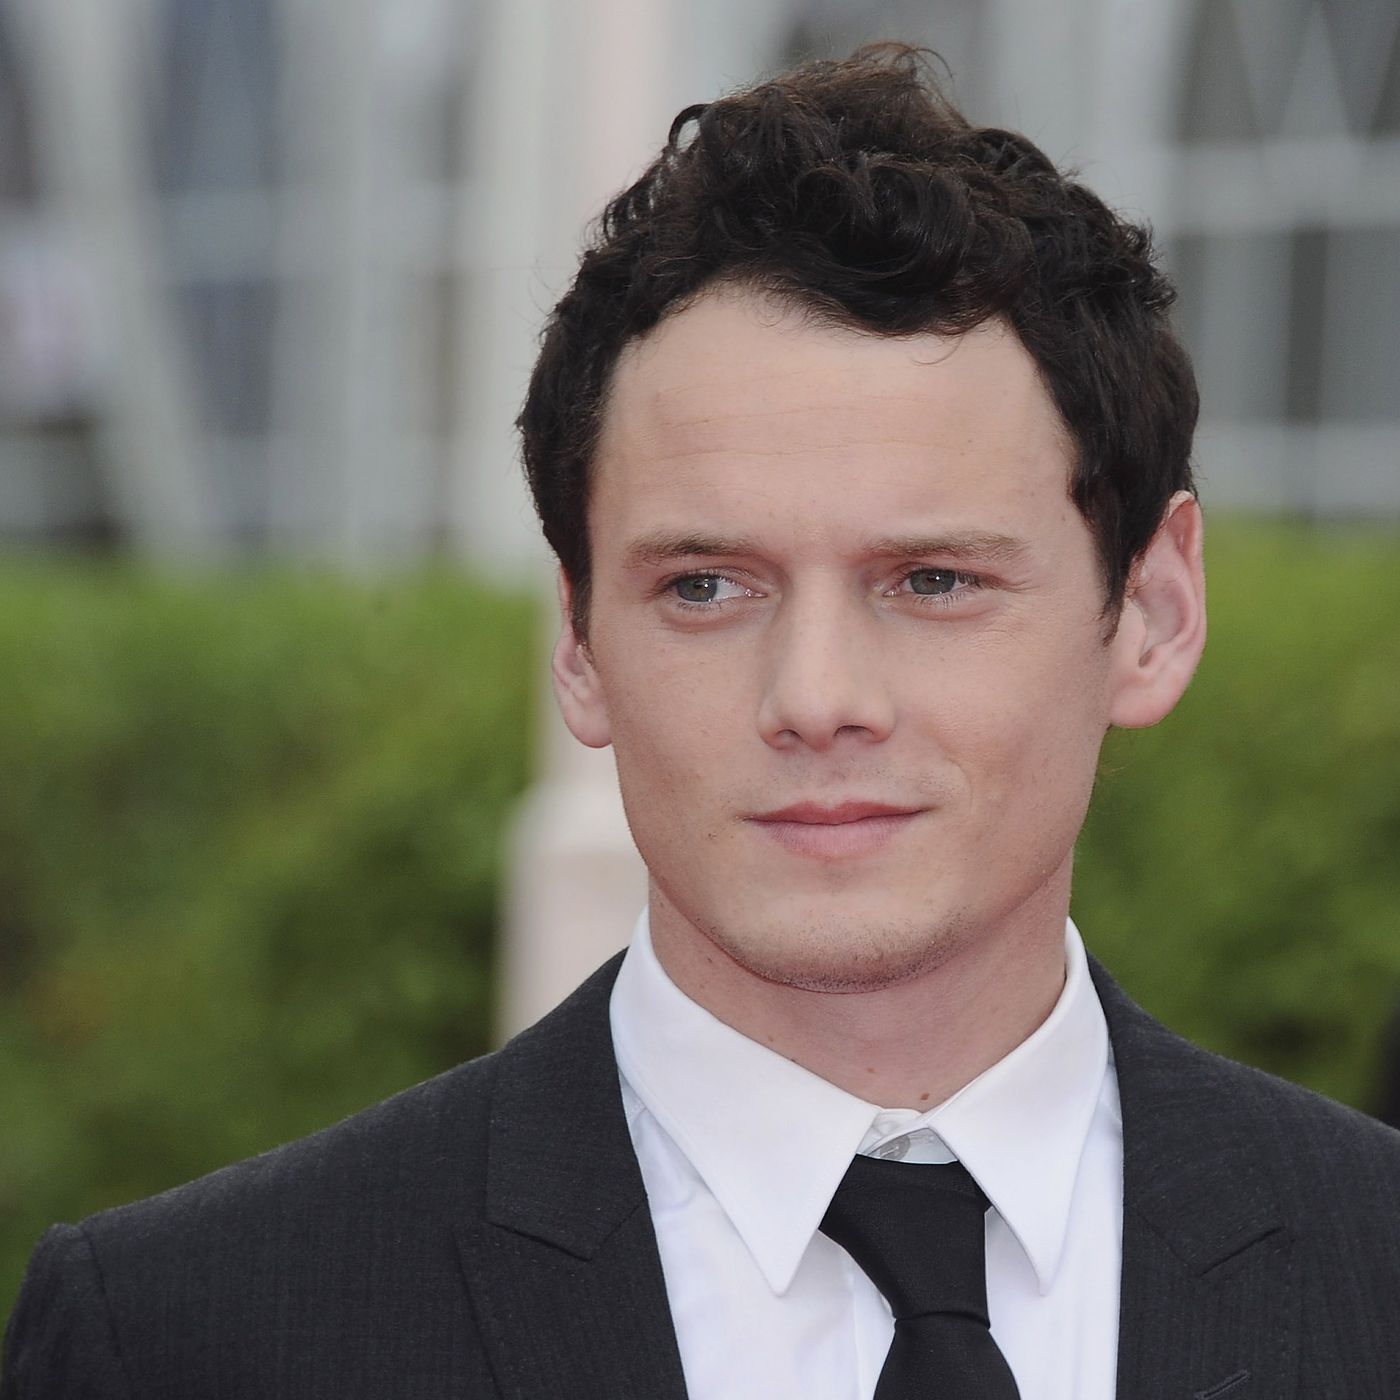 Star Trek actor Anton Yelchin's parents have filed a wrongful